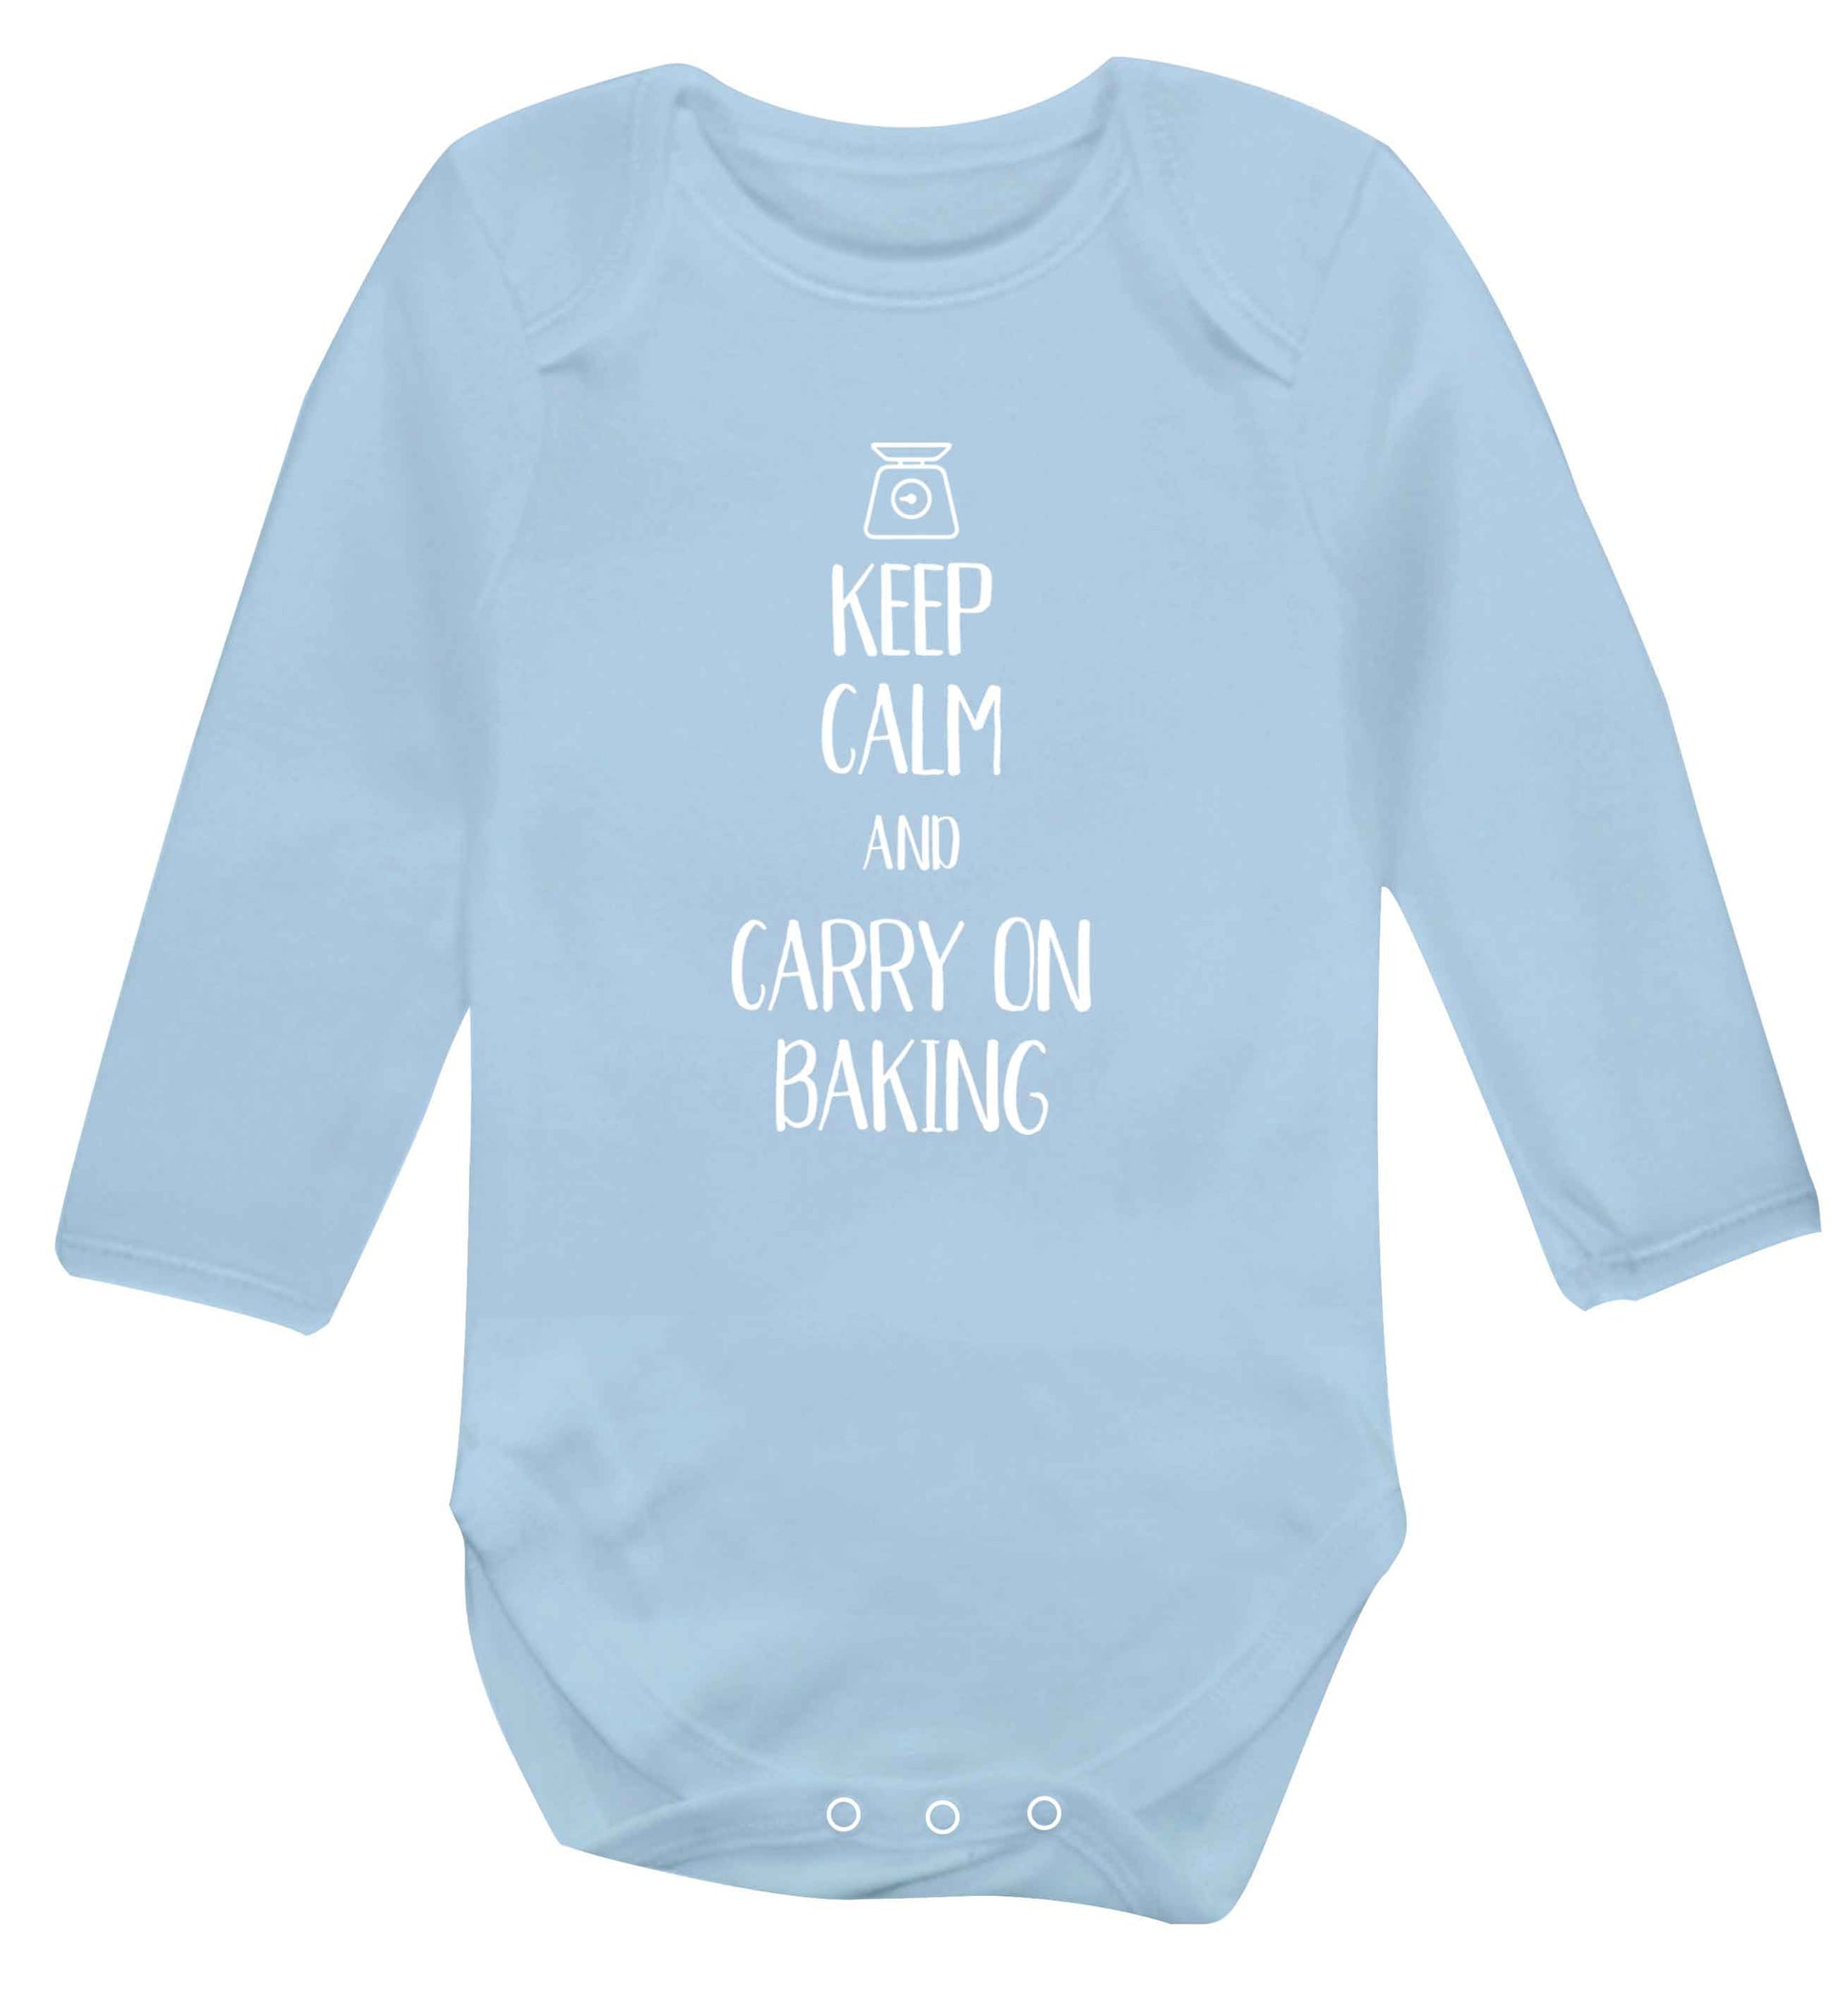 Keep calm and carry on baking Baby Vest long sleeved pale blue 6-12 months